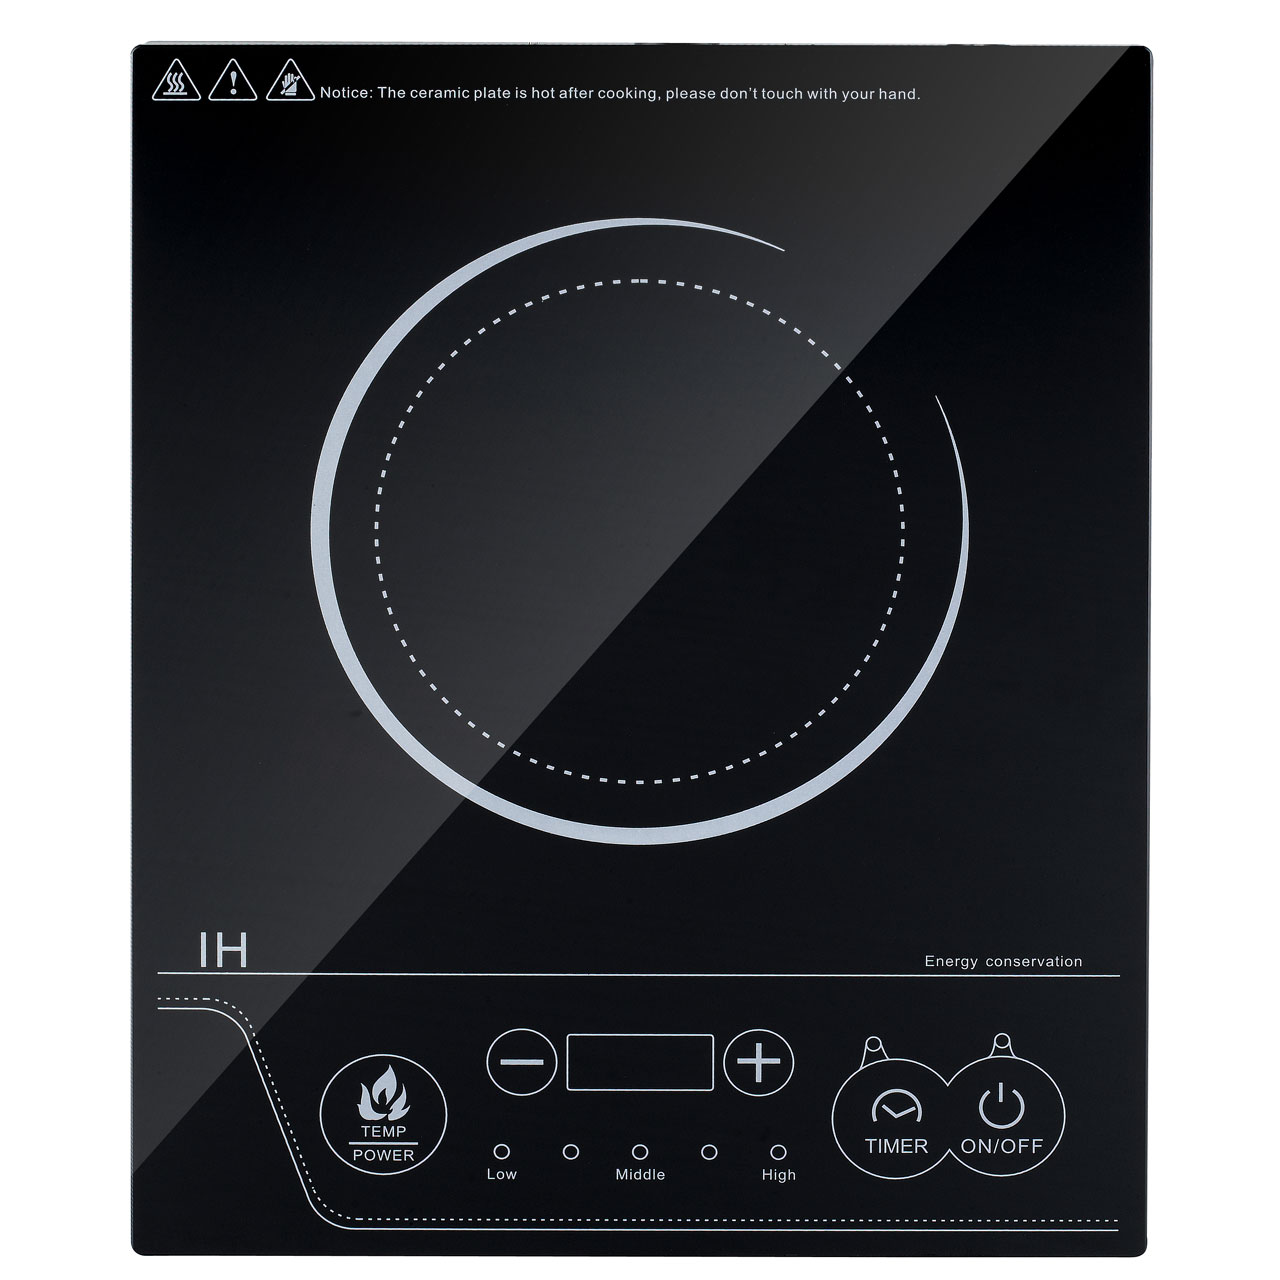 Induction cookers